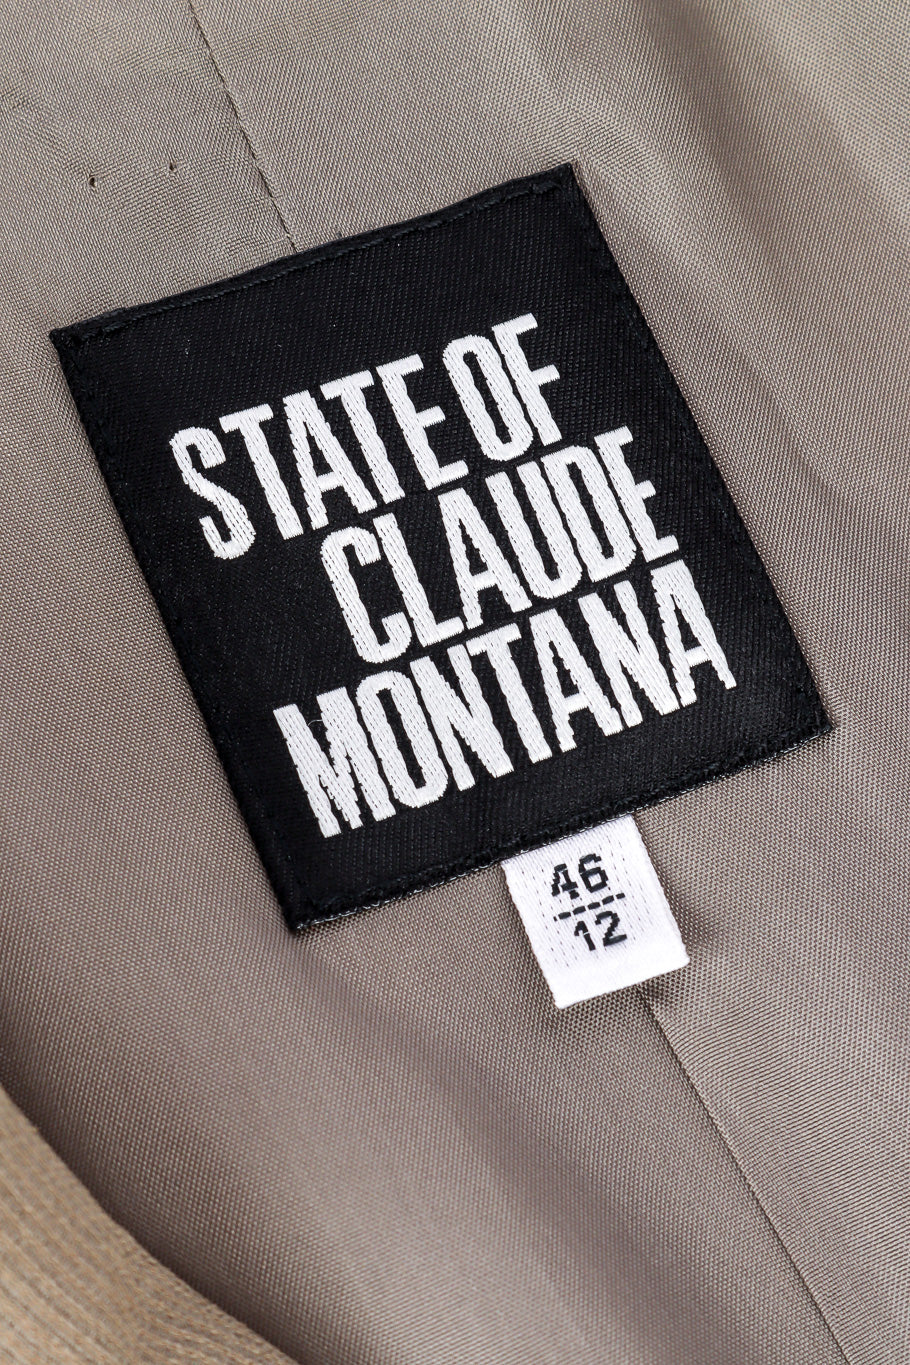  Jacket and pant suit set by State of Claude Montana jacket label @recessla